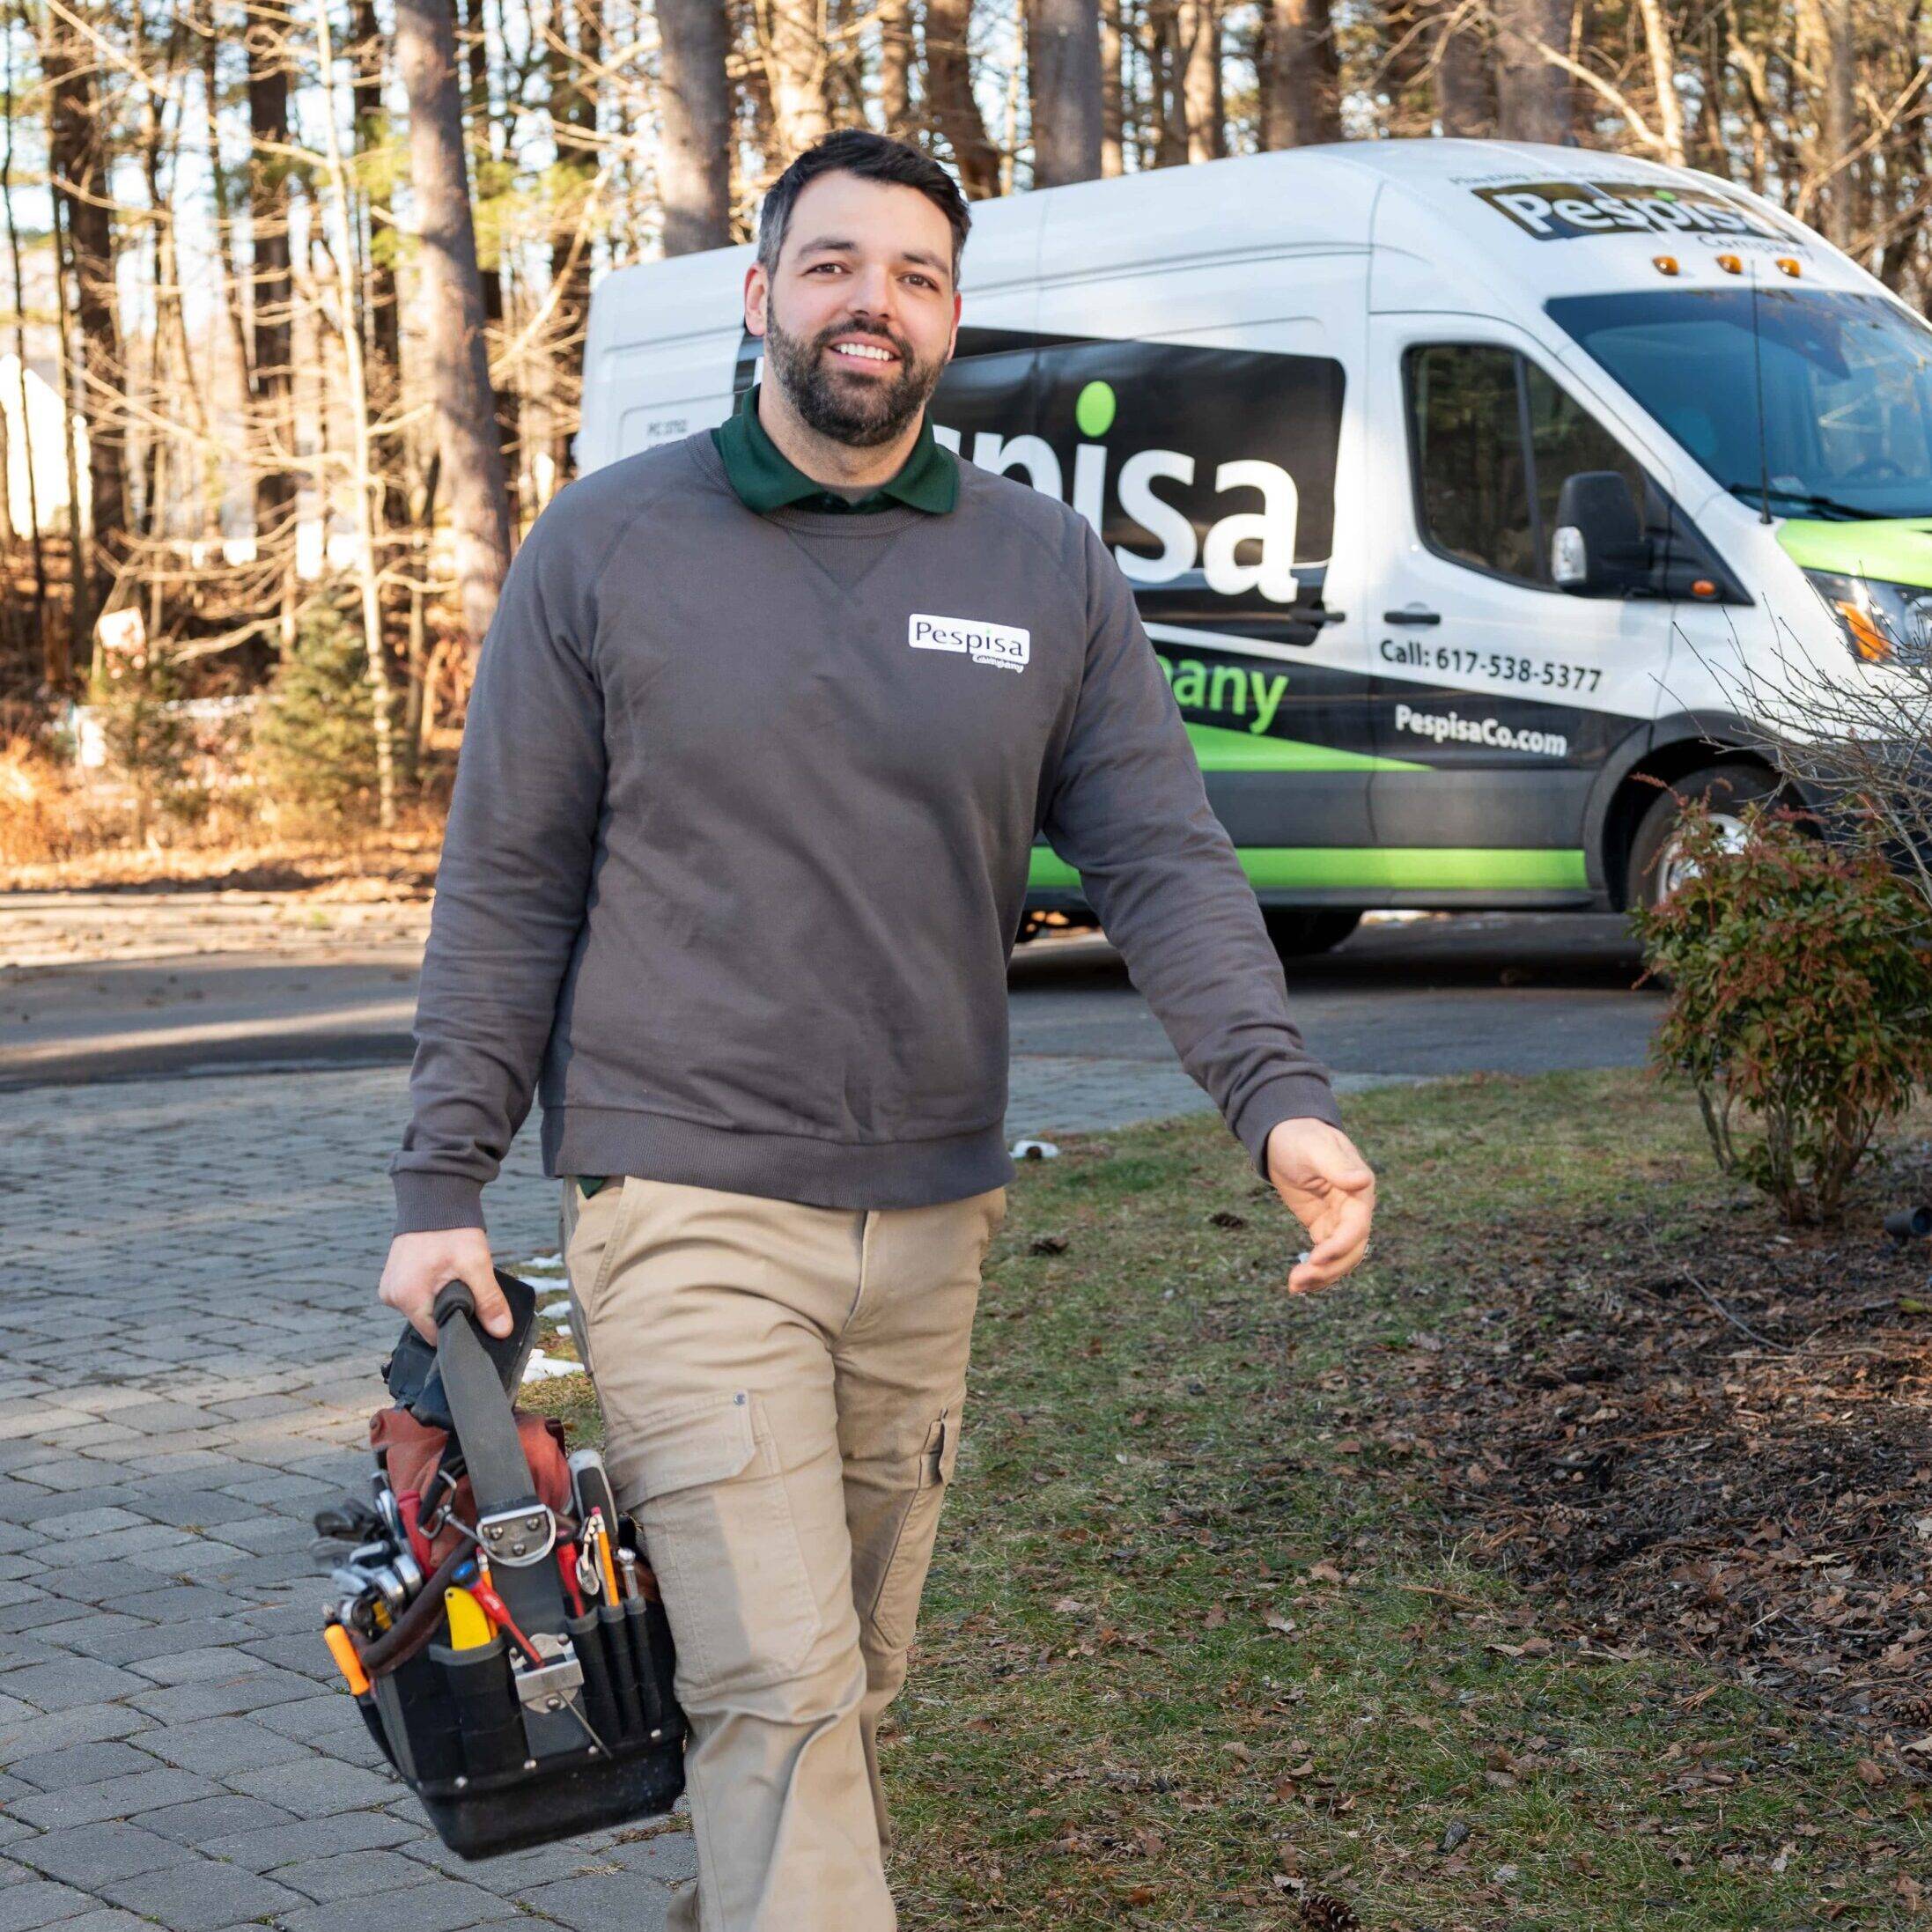 Pespisa Company service  plan tailored specifically for Boilers, Furnaces, Ductless Heat Pumps, and Air Conditioners for Heating and Cooling.